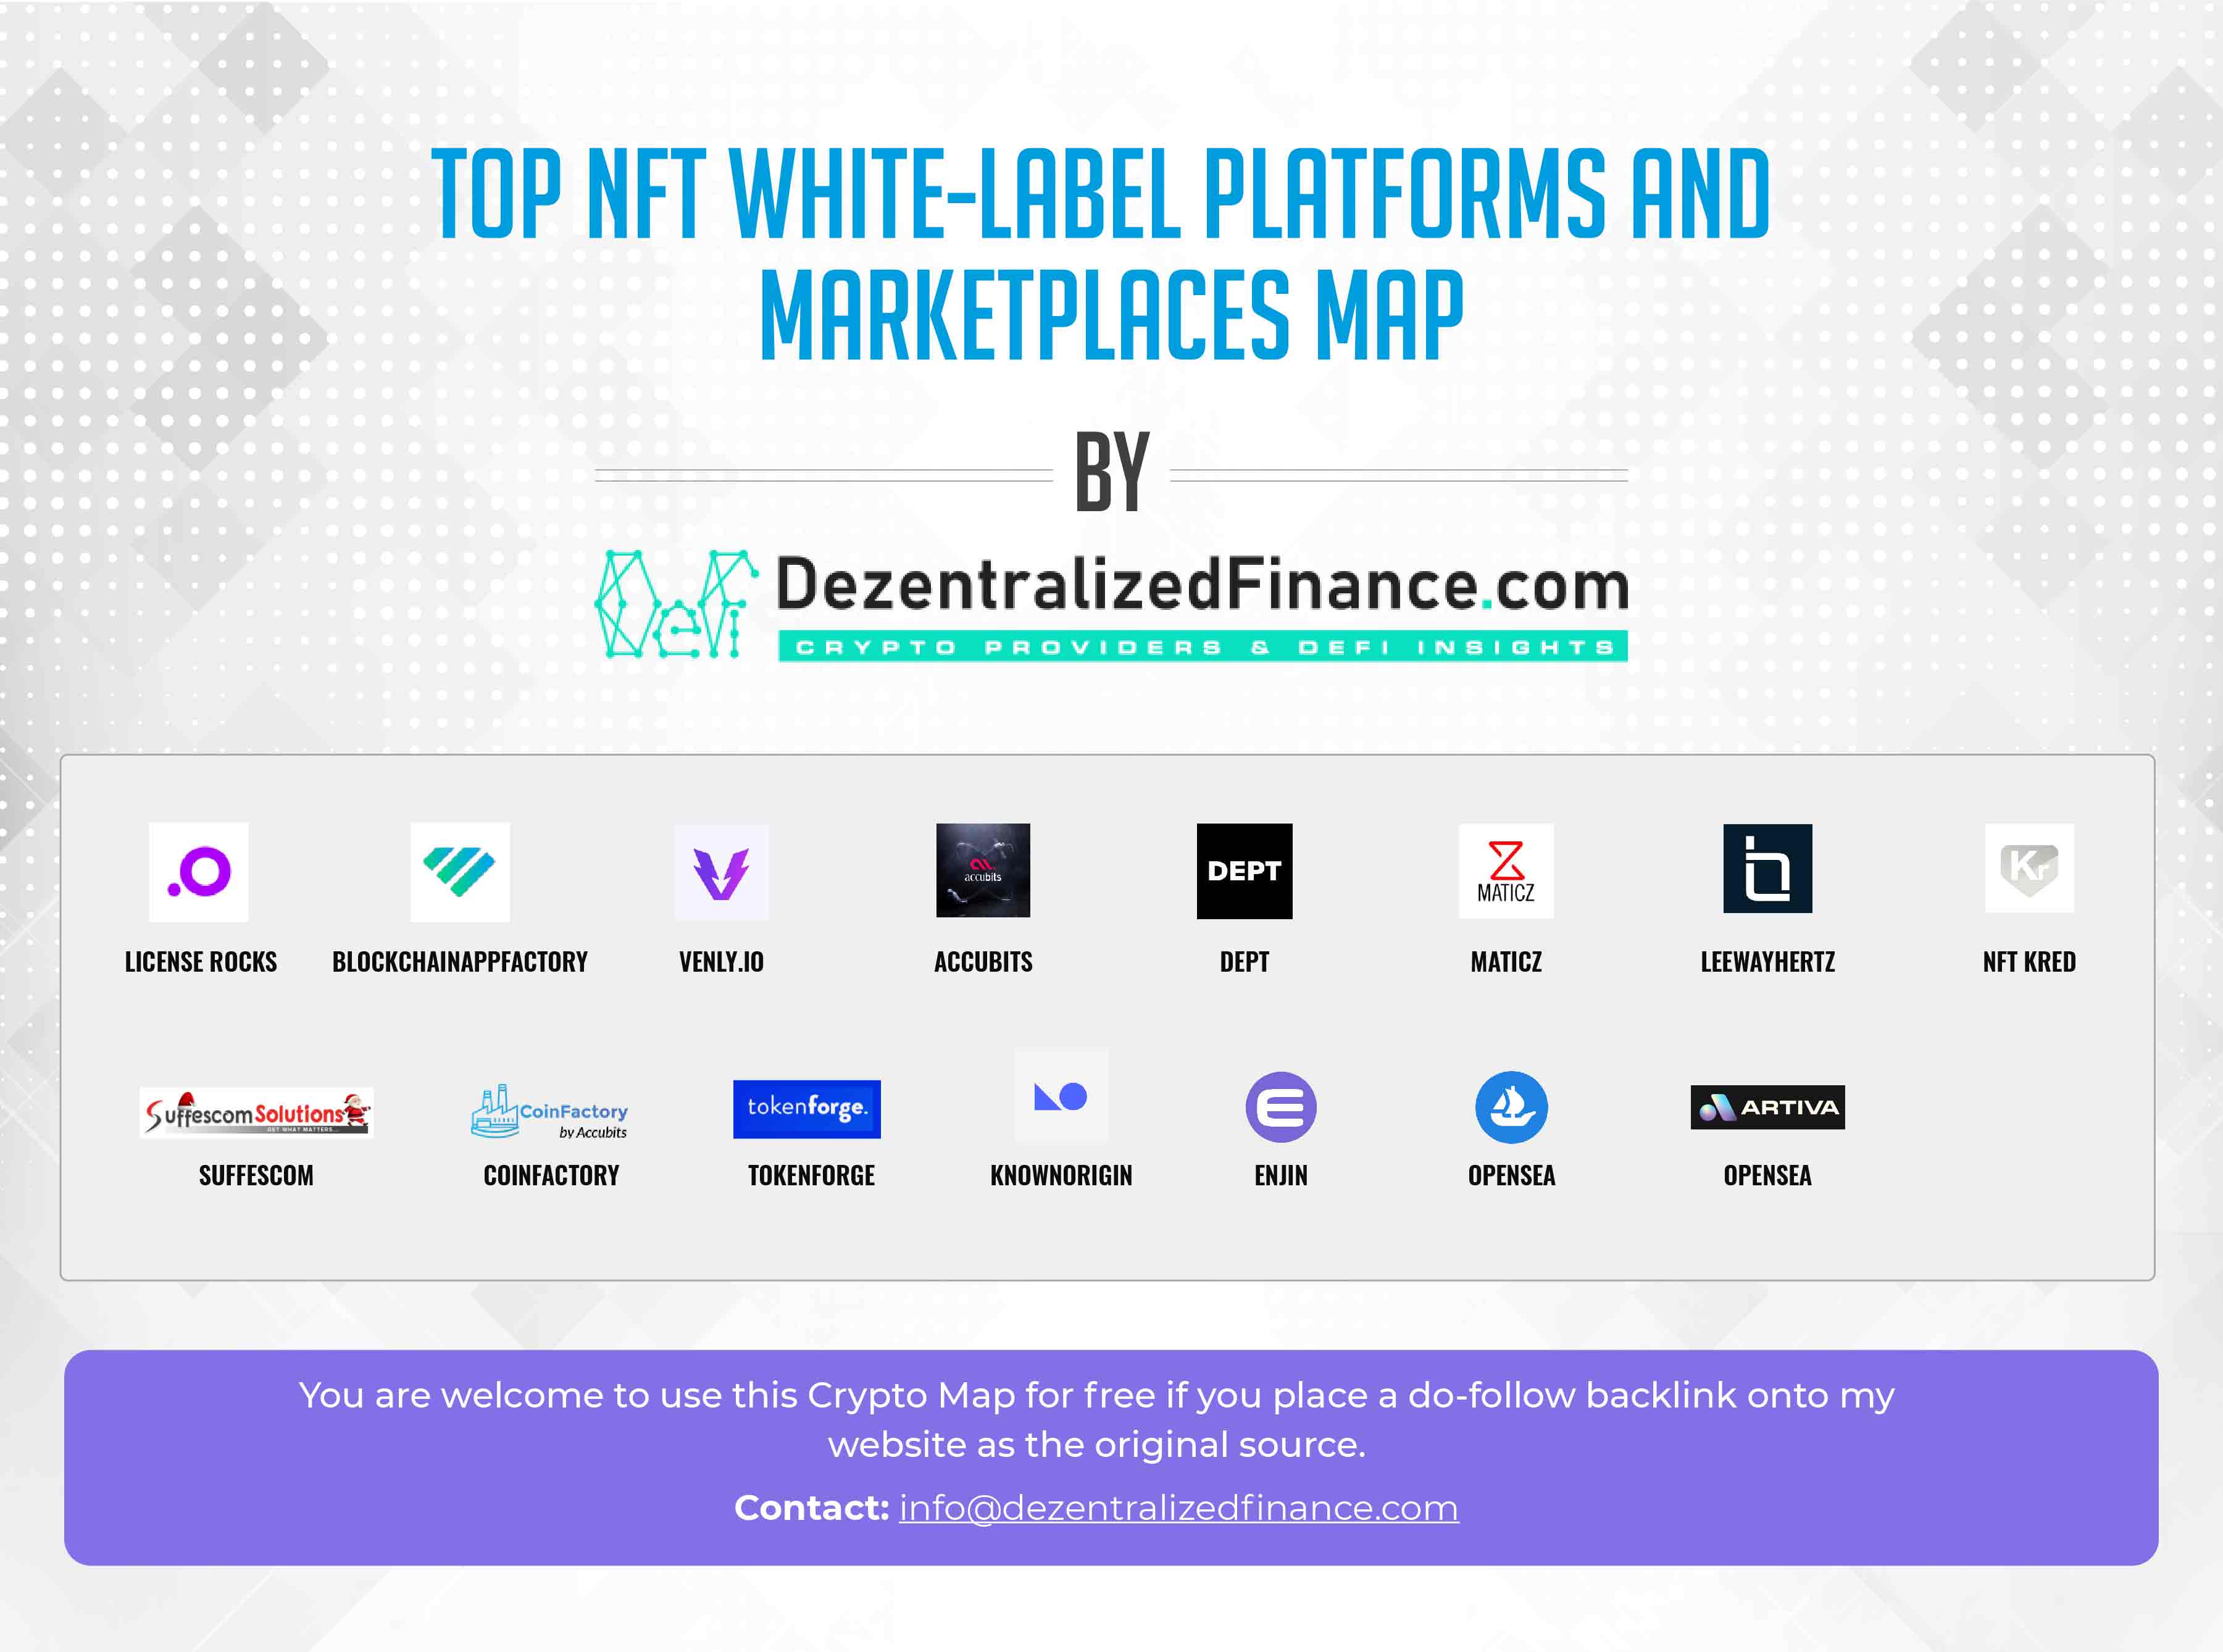 Top-NFT-White-Label-Platforms-and-Marketplaces